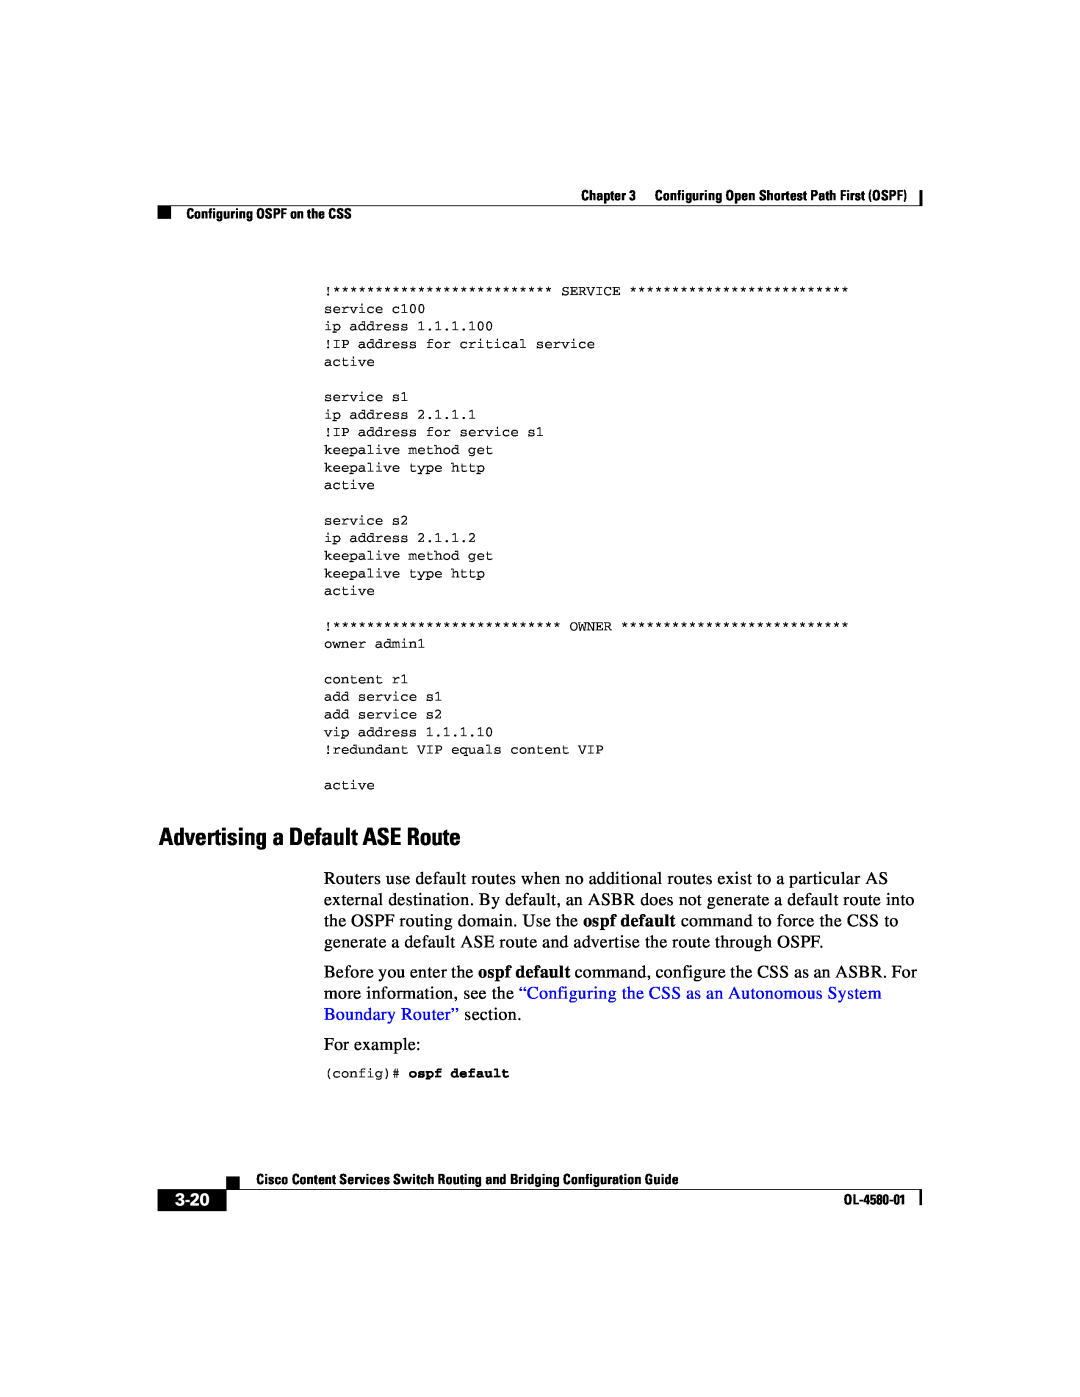 Cisco Systems OL-4580-01 manual Advertising a Default ASE Route, 3-20, config# ospf default 